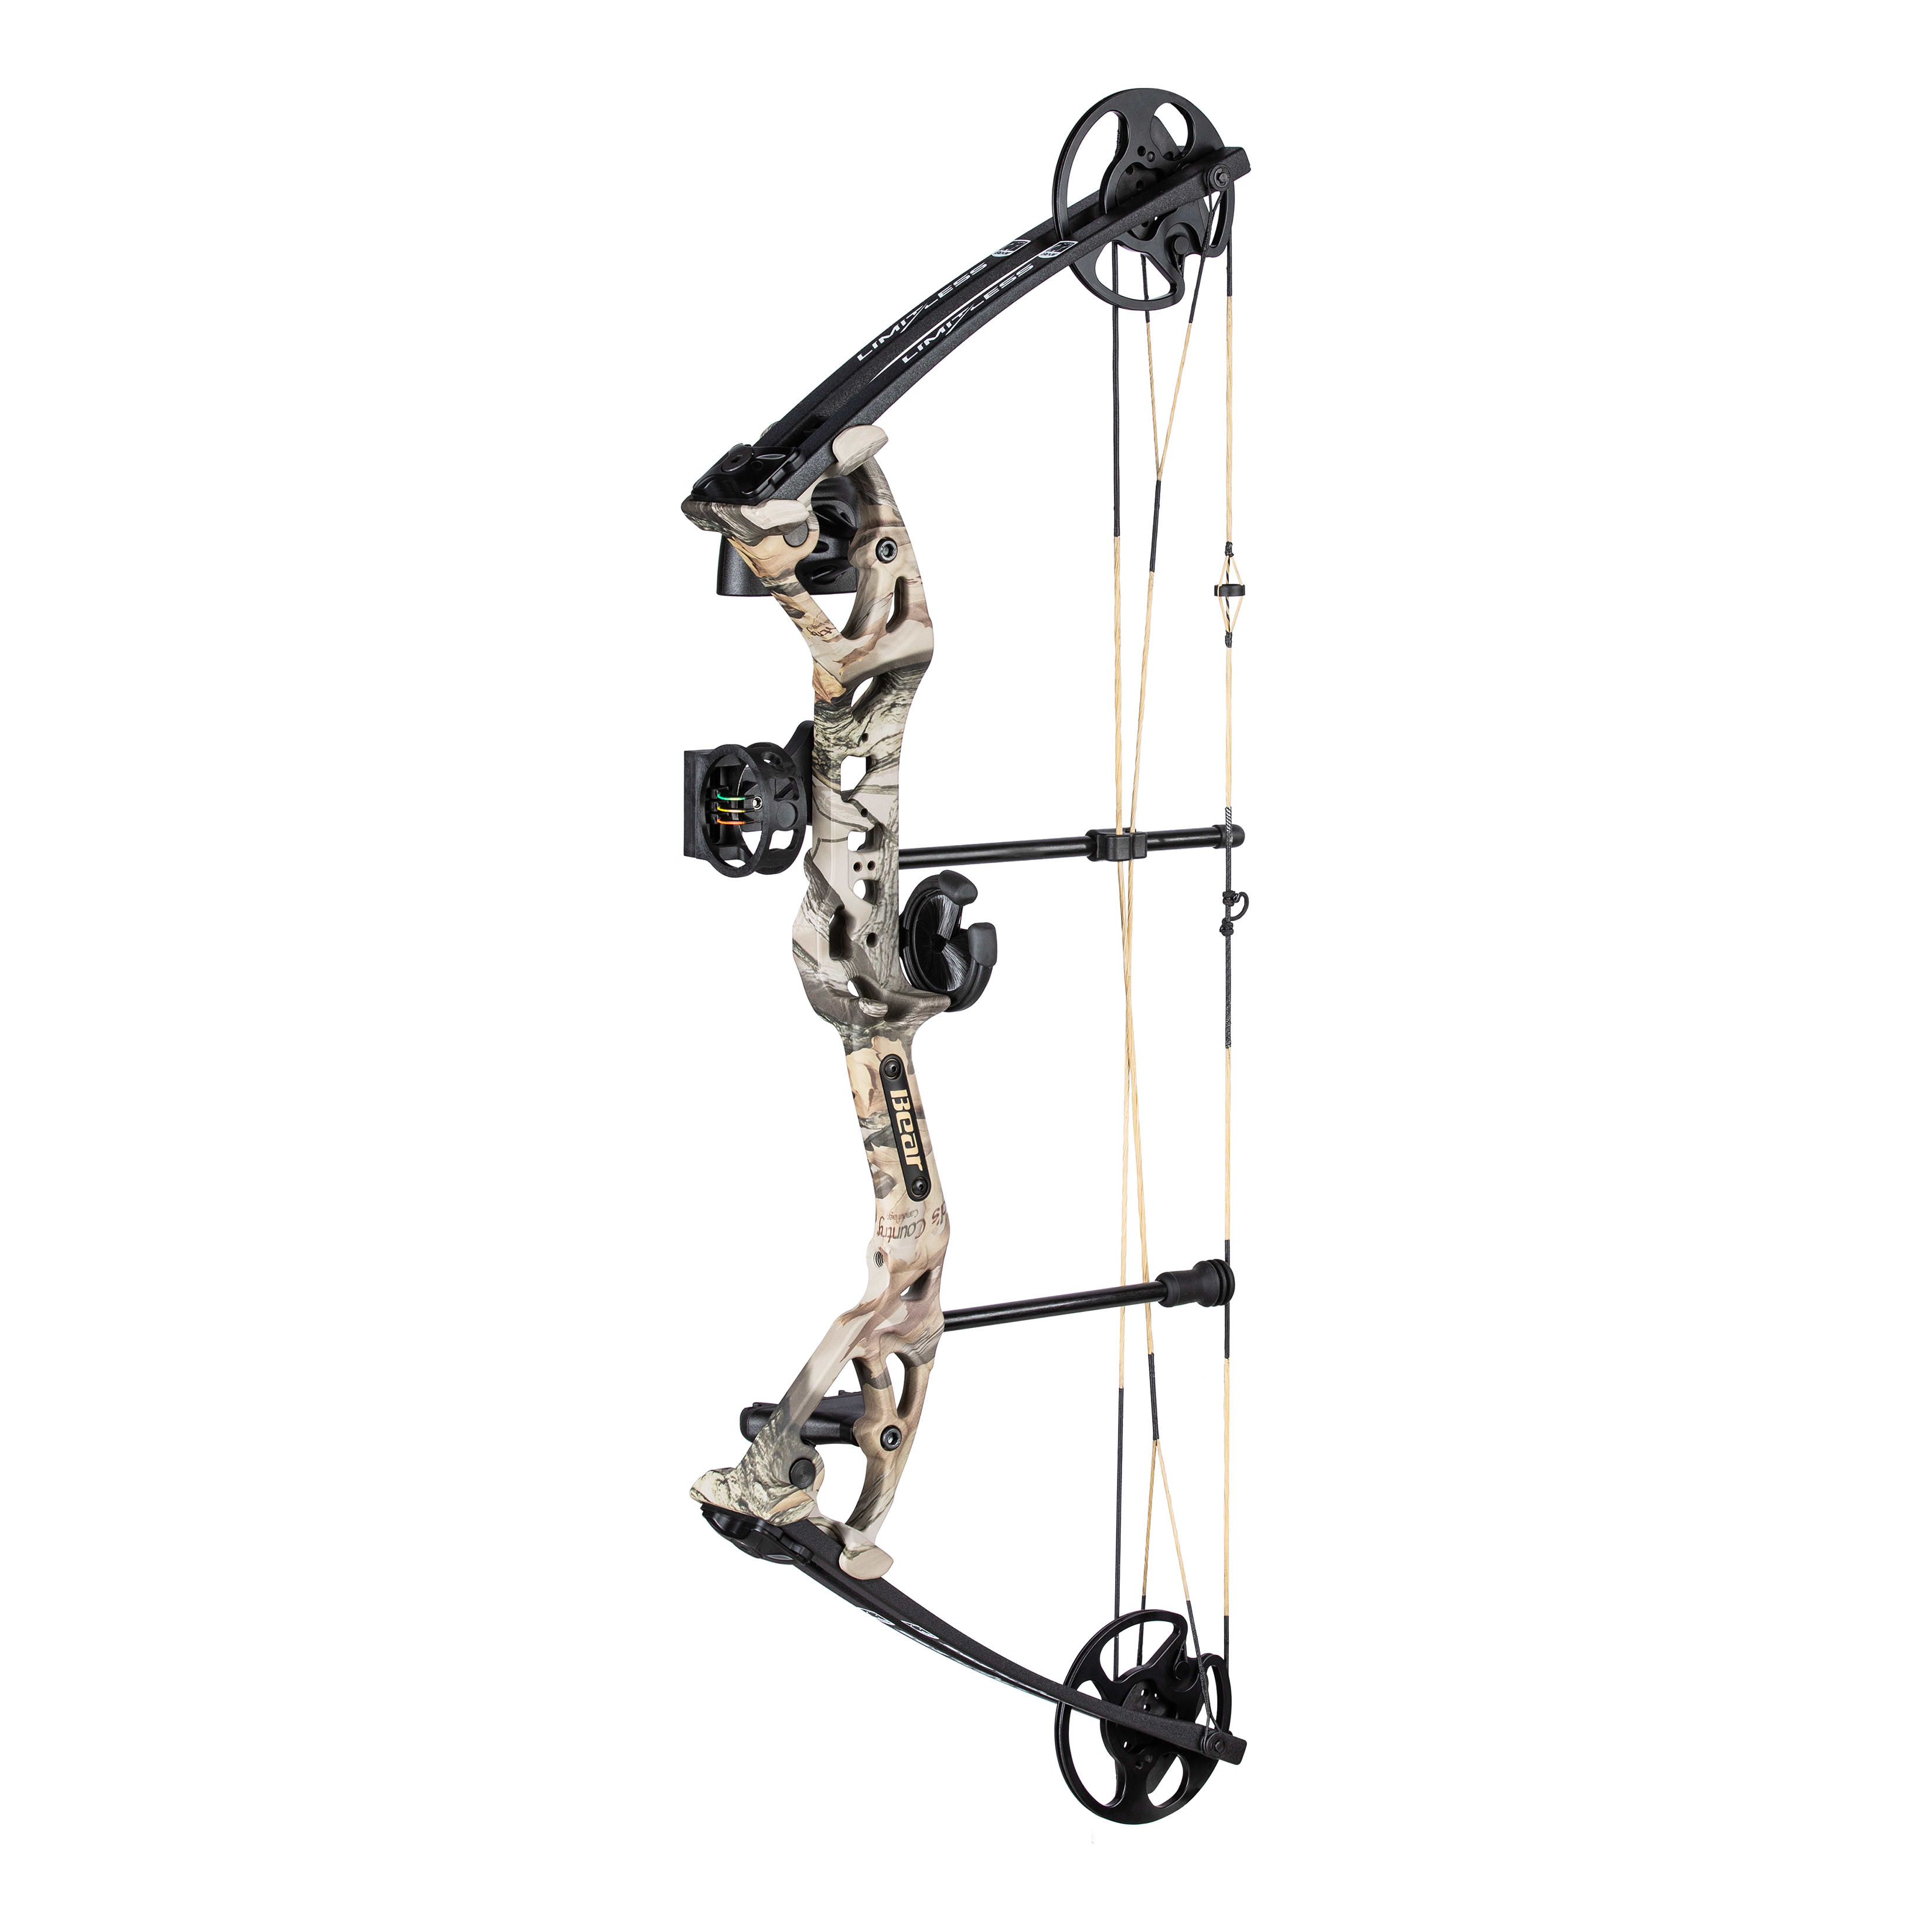 Bear Archery Limitless Compound Bow Package